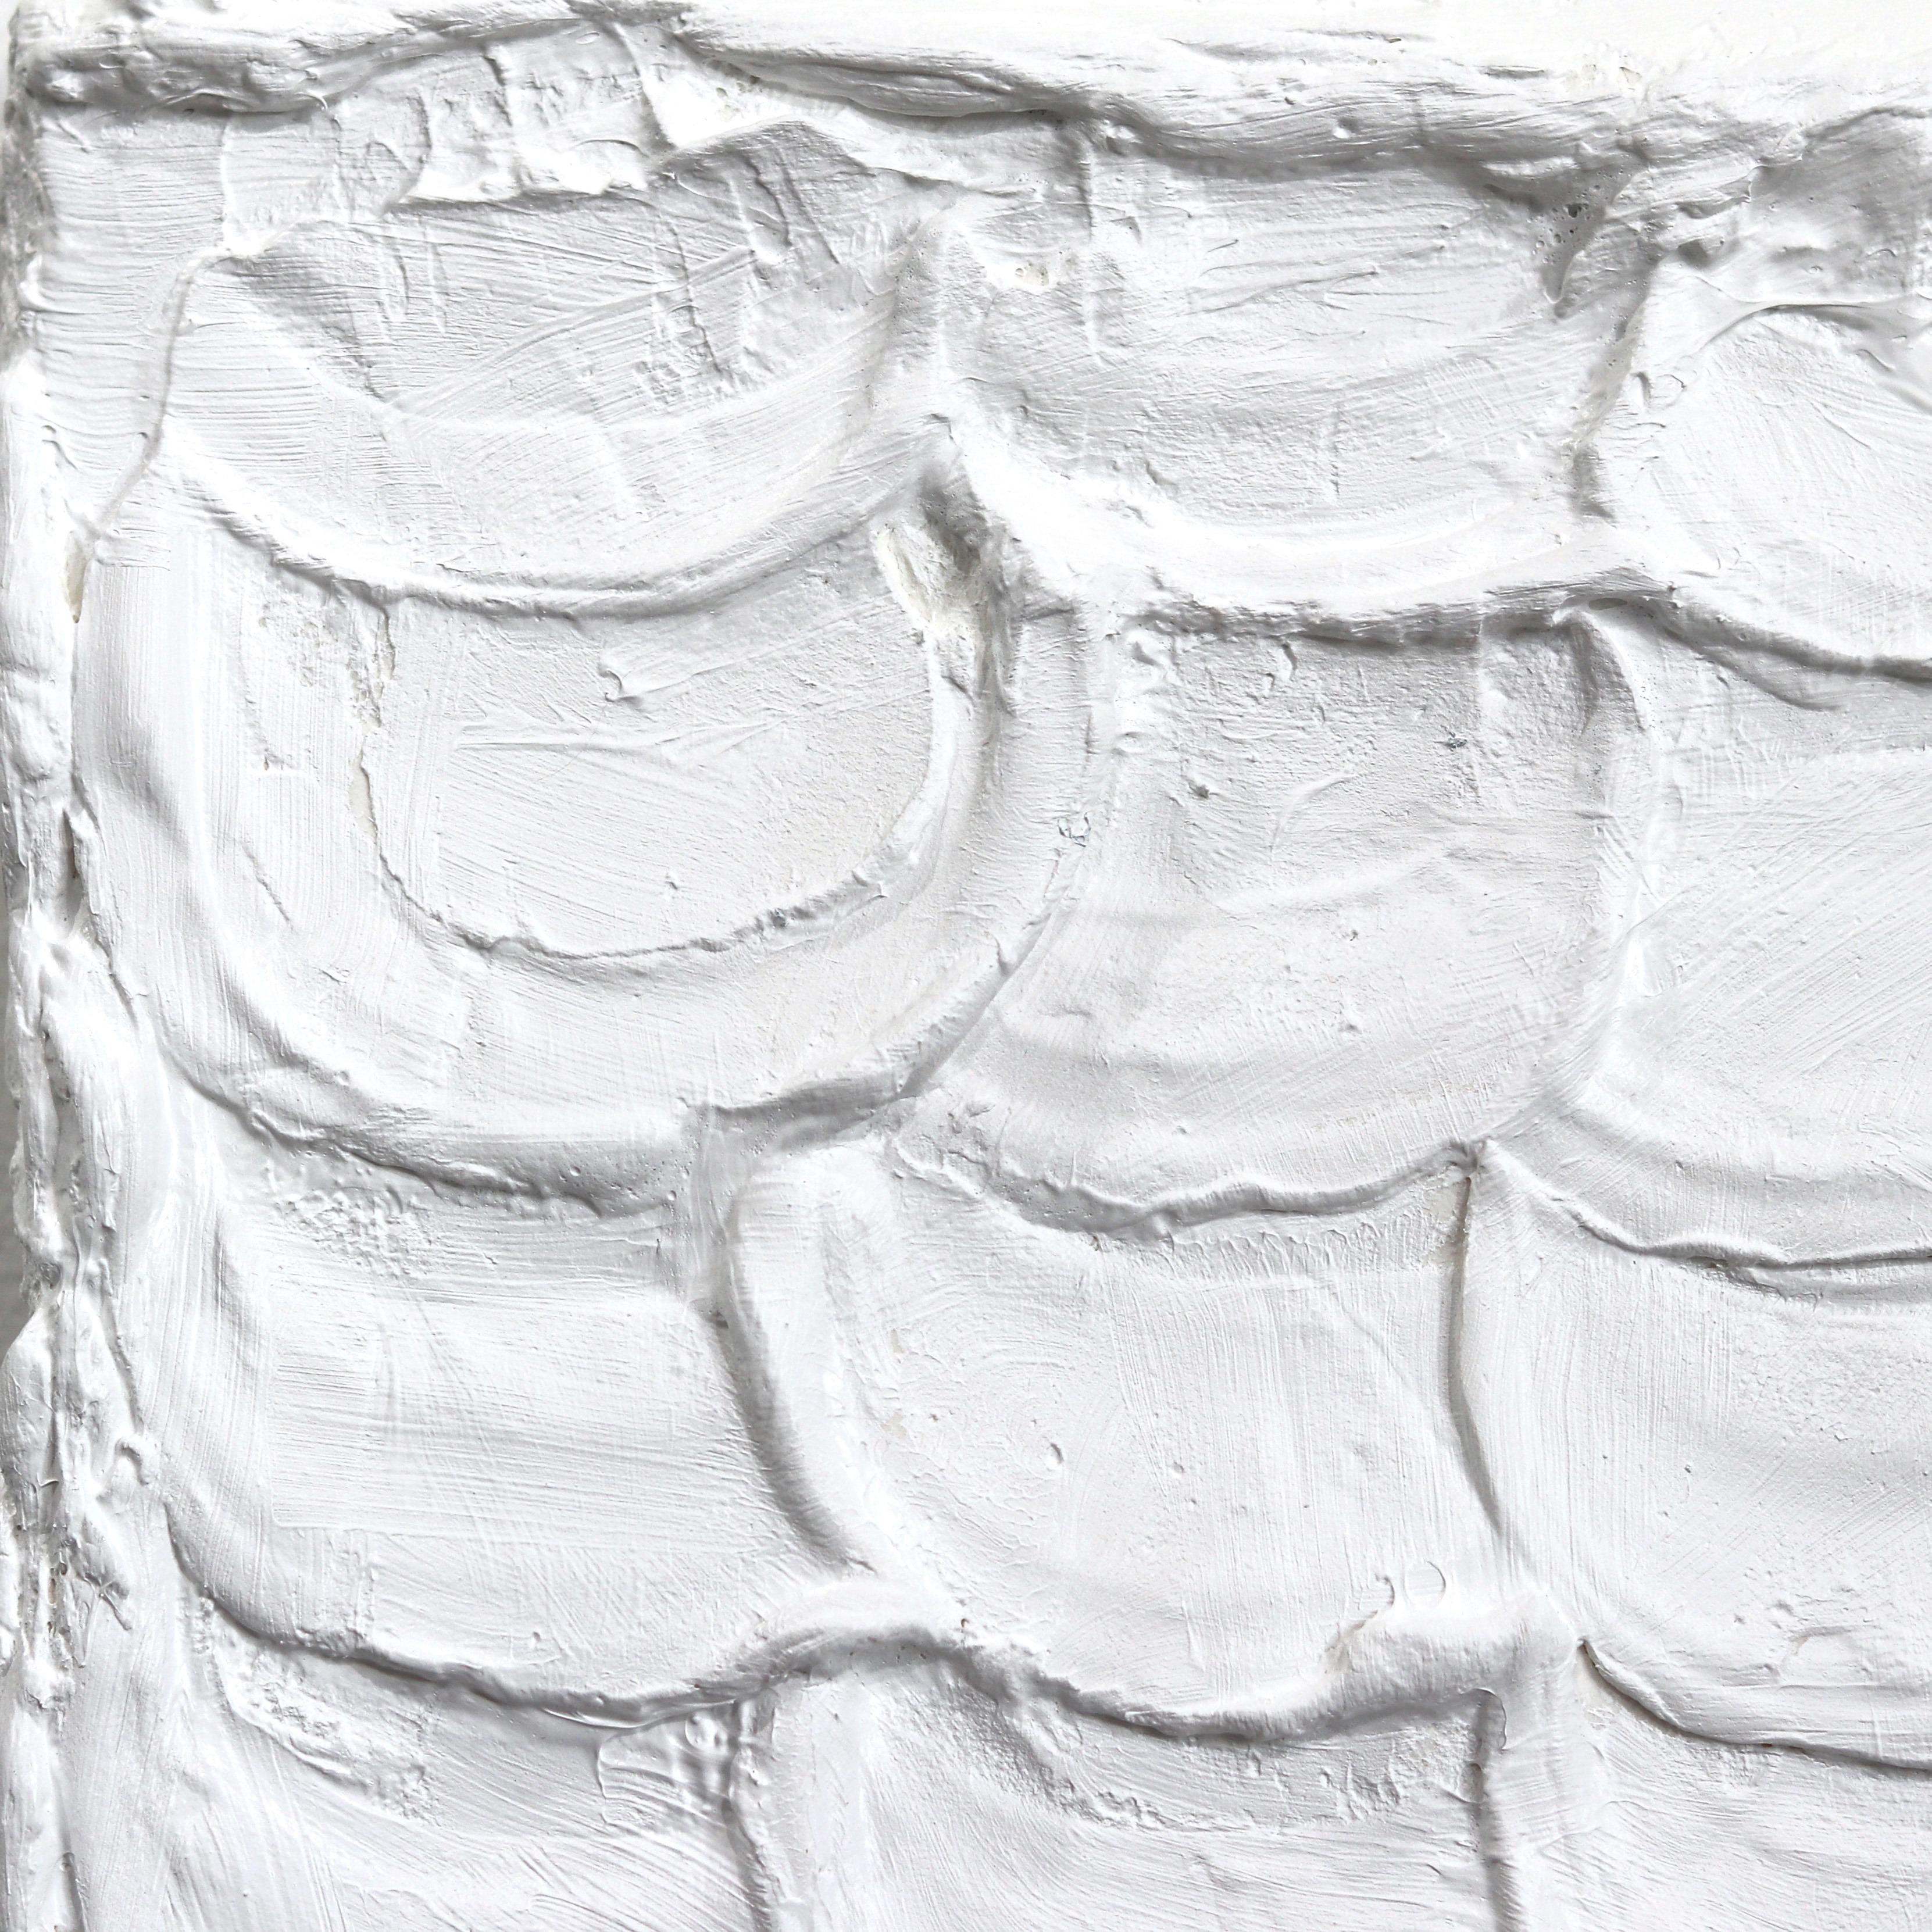 Rugged Elements #5 - White Thick Texture Abstract Minimalist Artwork on Canvas - Gray Abstract Painting by Len Klikunas